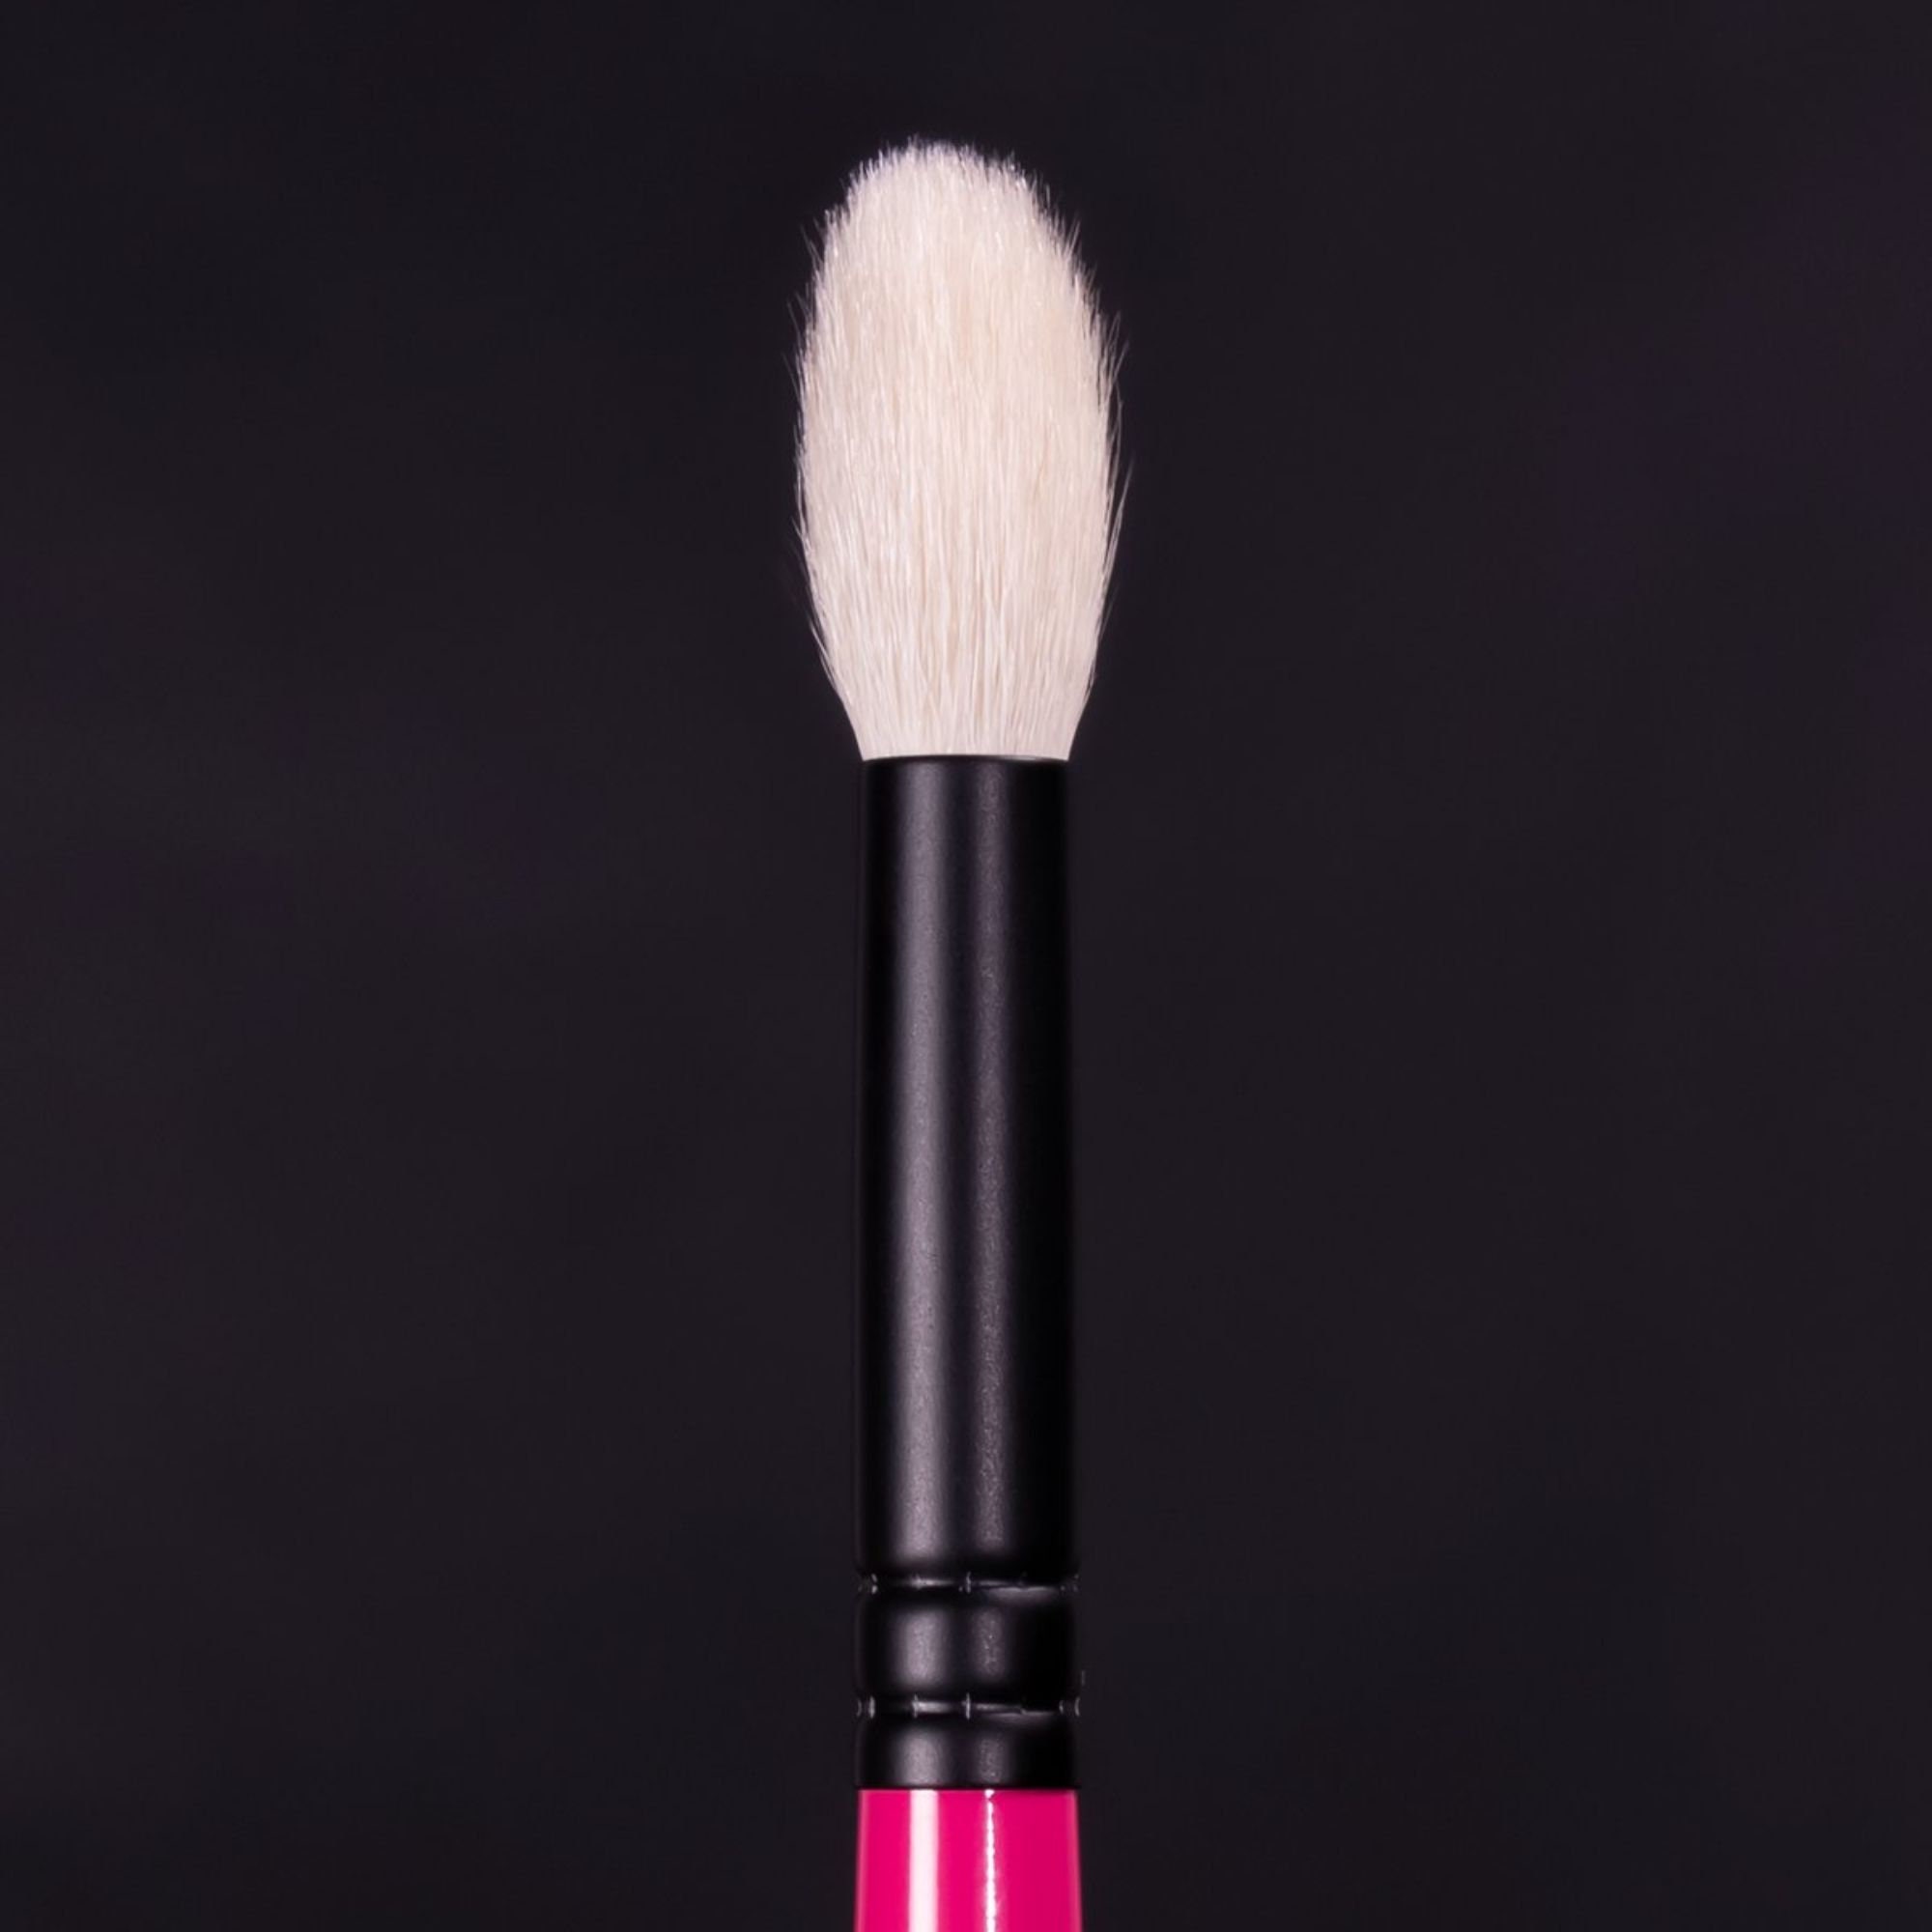 Whats Up Beauty - R104 Fluffy Blending Eyeshadow Brush For Eye Shadow Makeup Cruelty Free